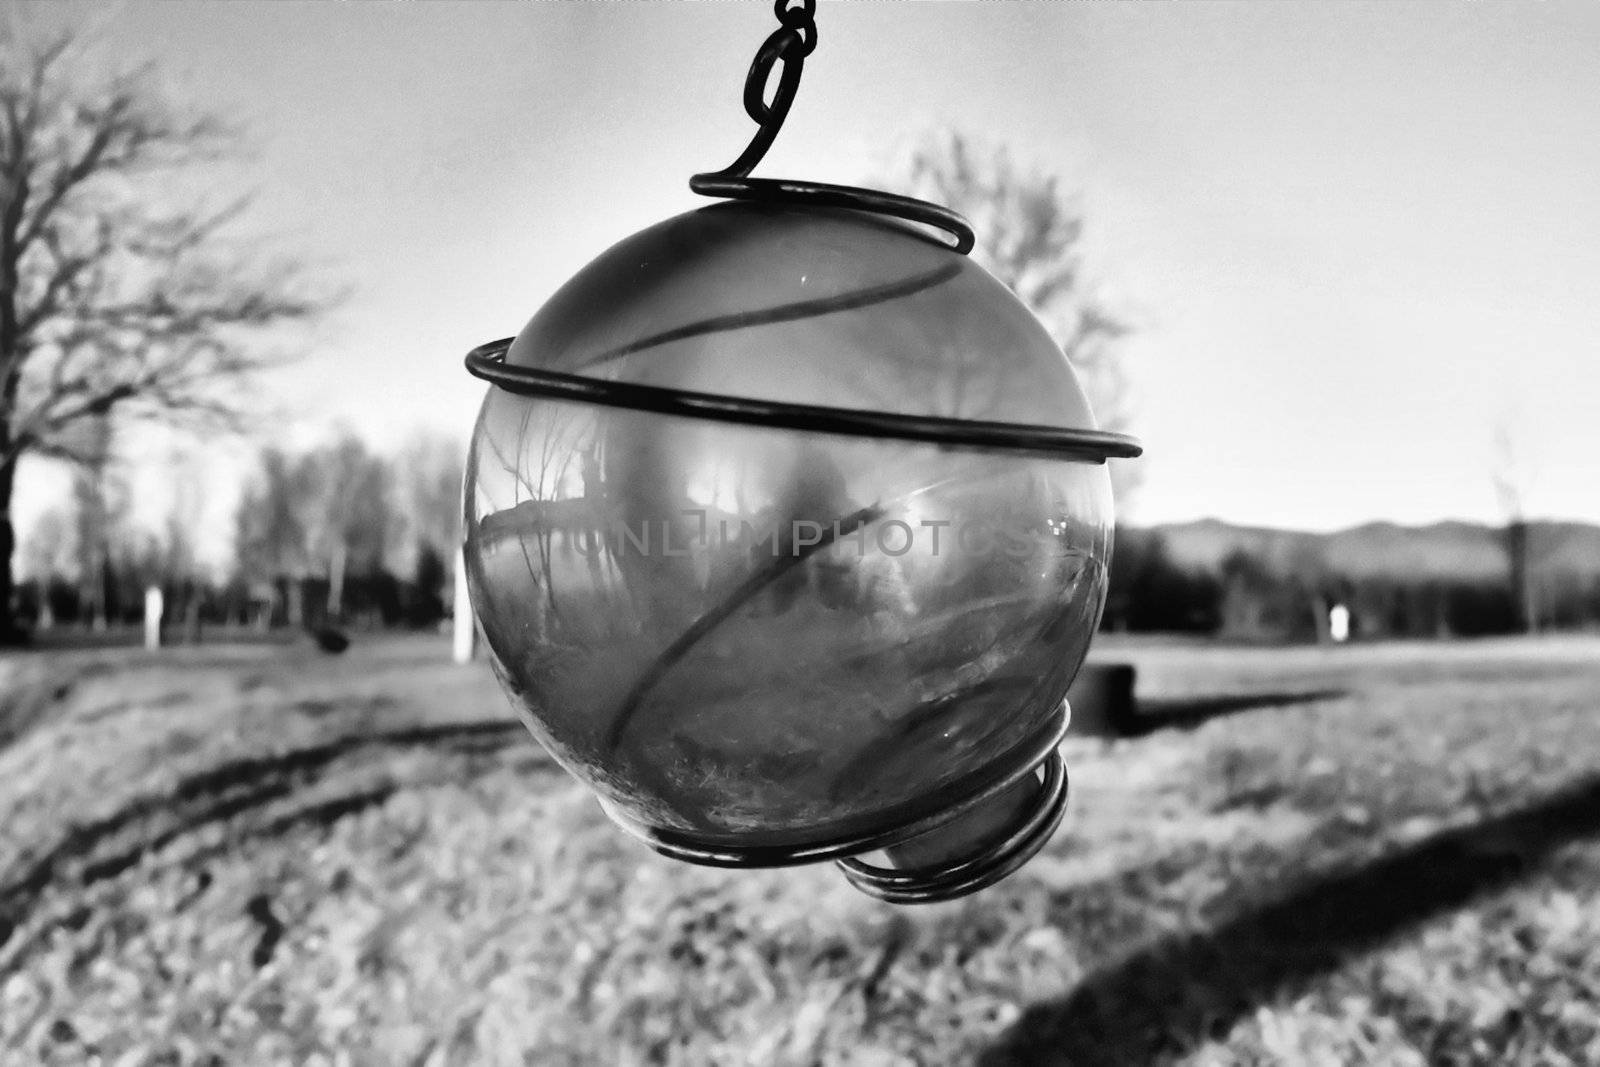 A large hanging ball shown in black and white